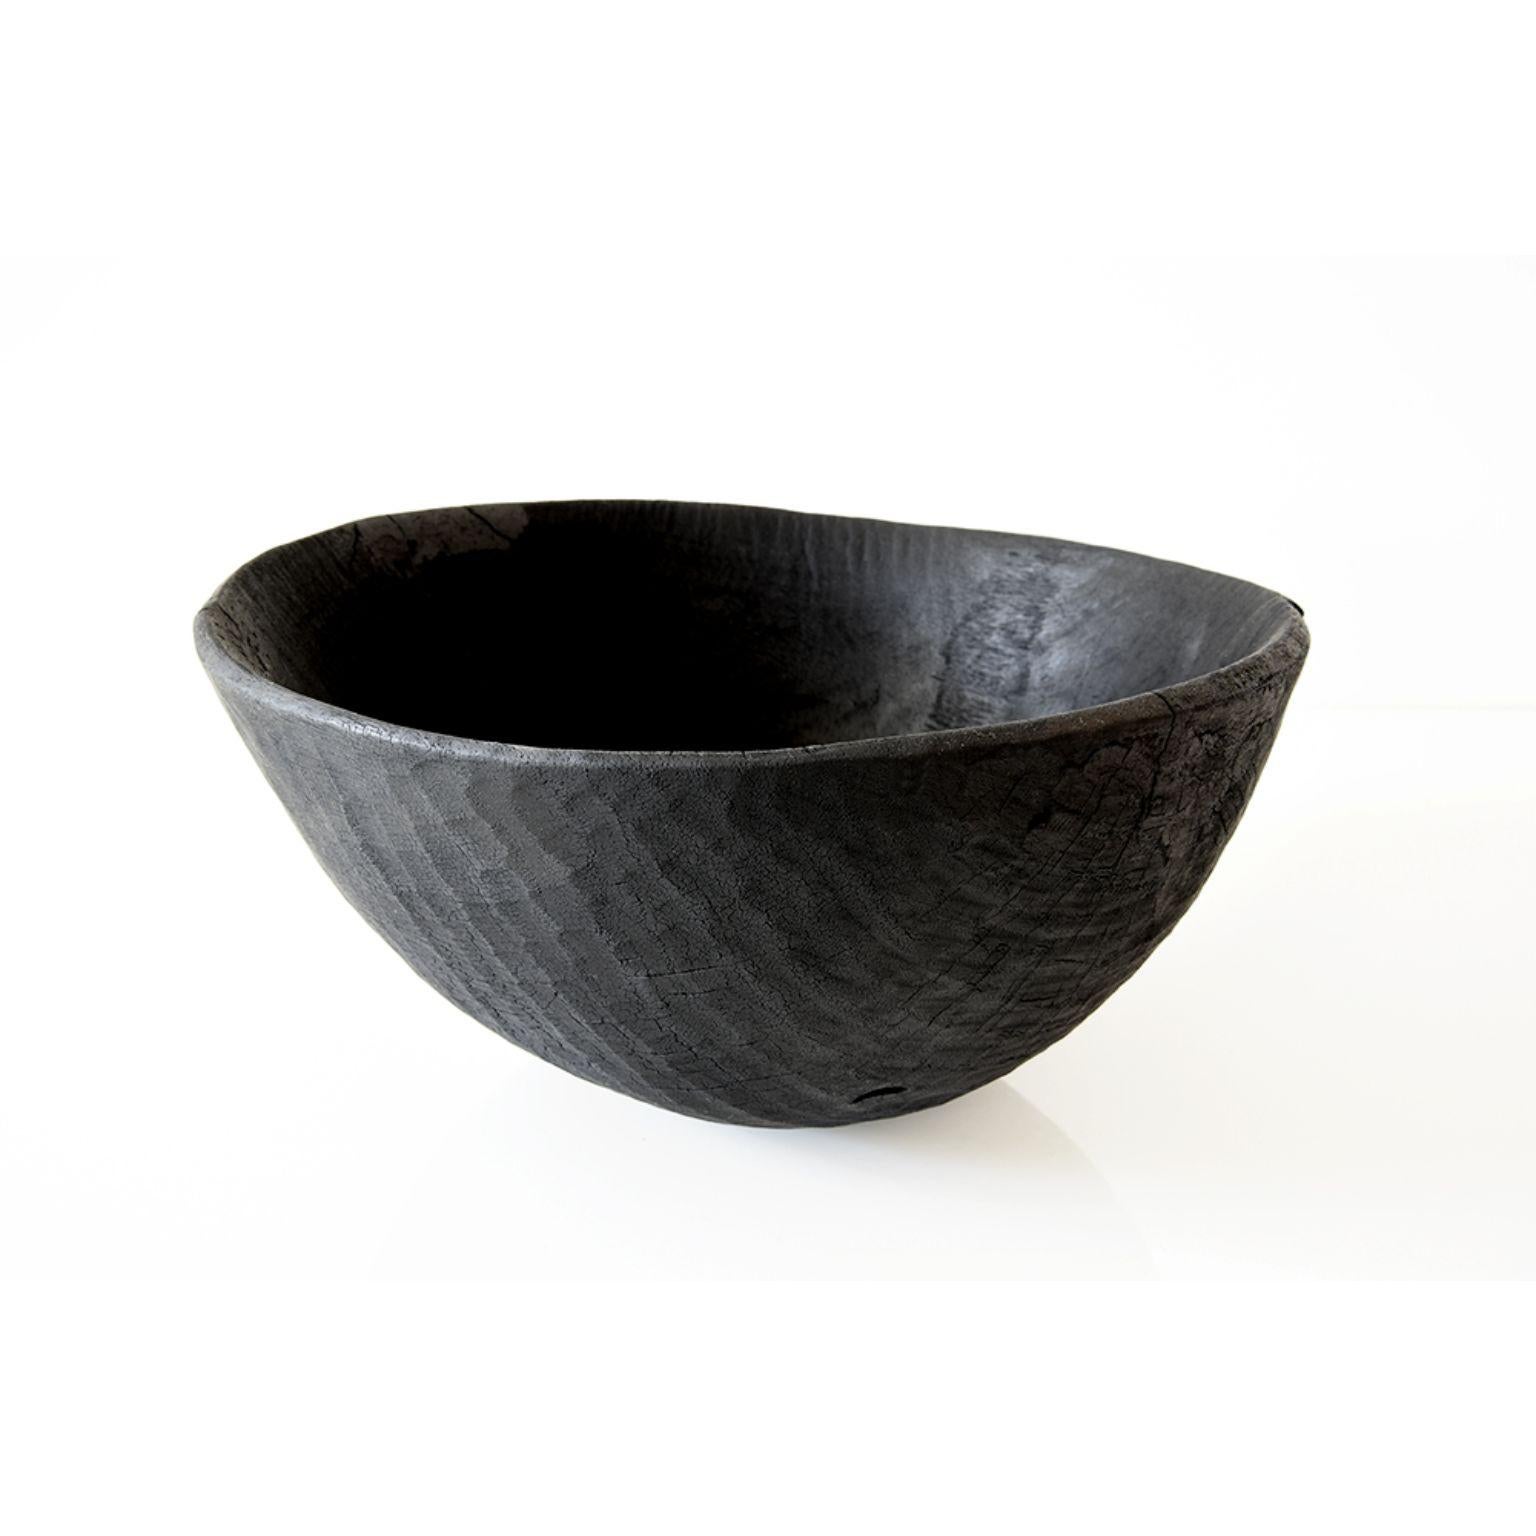 OO.03 Bowl vase by Sebastien Krier + Bois Brulé
Dimensions: D30 x H15 cm
Materials: Wood

All these pieces are unique, they are mottled, modified, refined and
burnt according to the Japanese technique SHOU-SUGI-BAN. With treatment in surface to